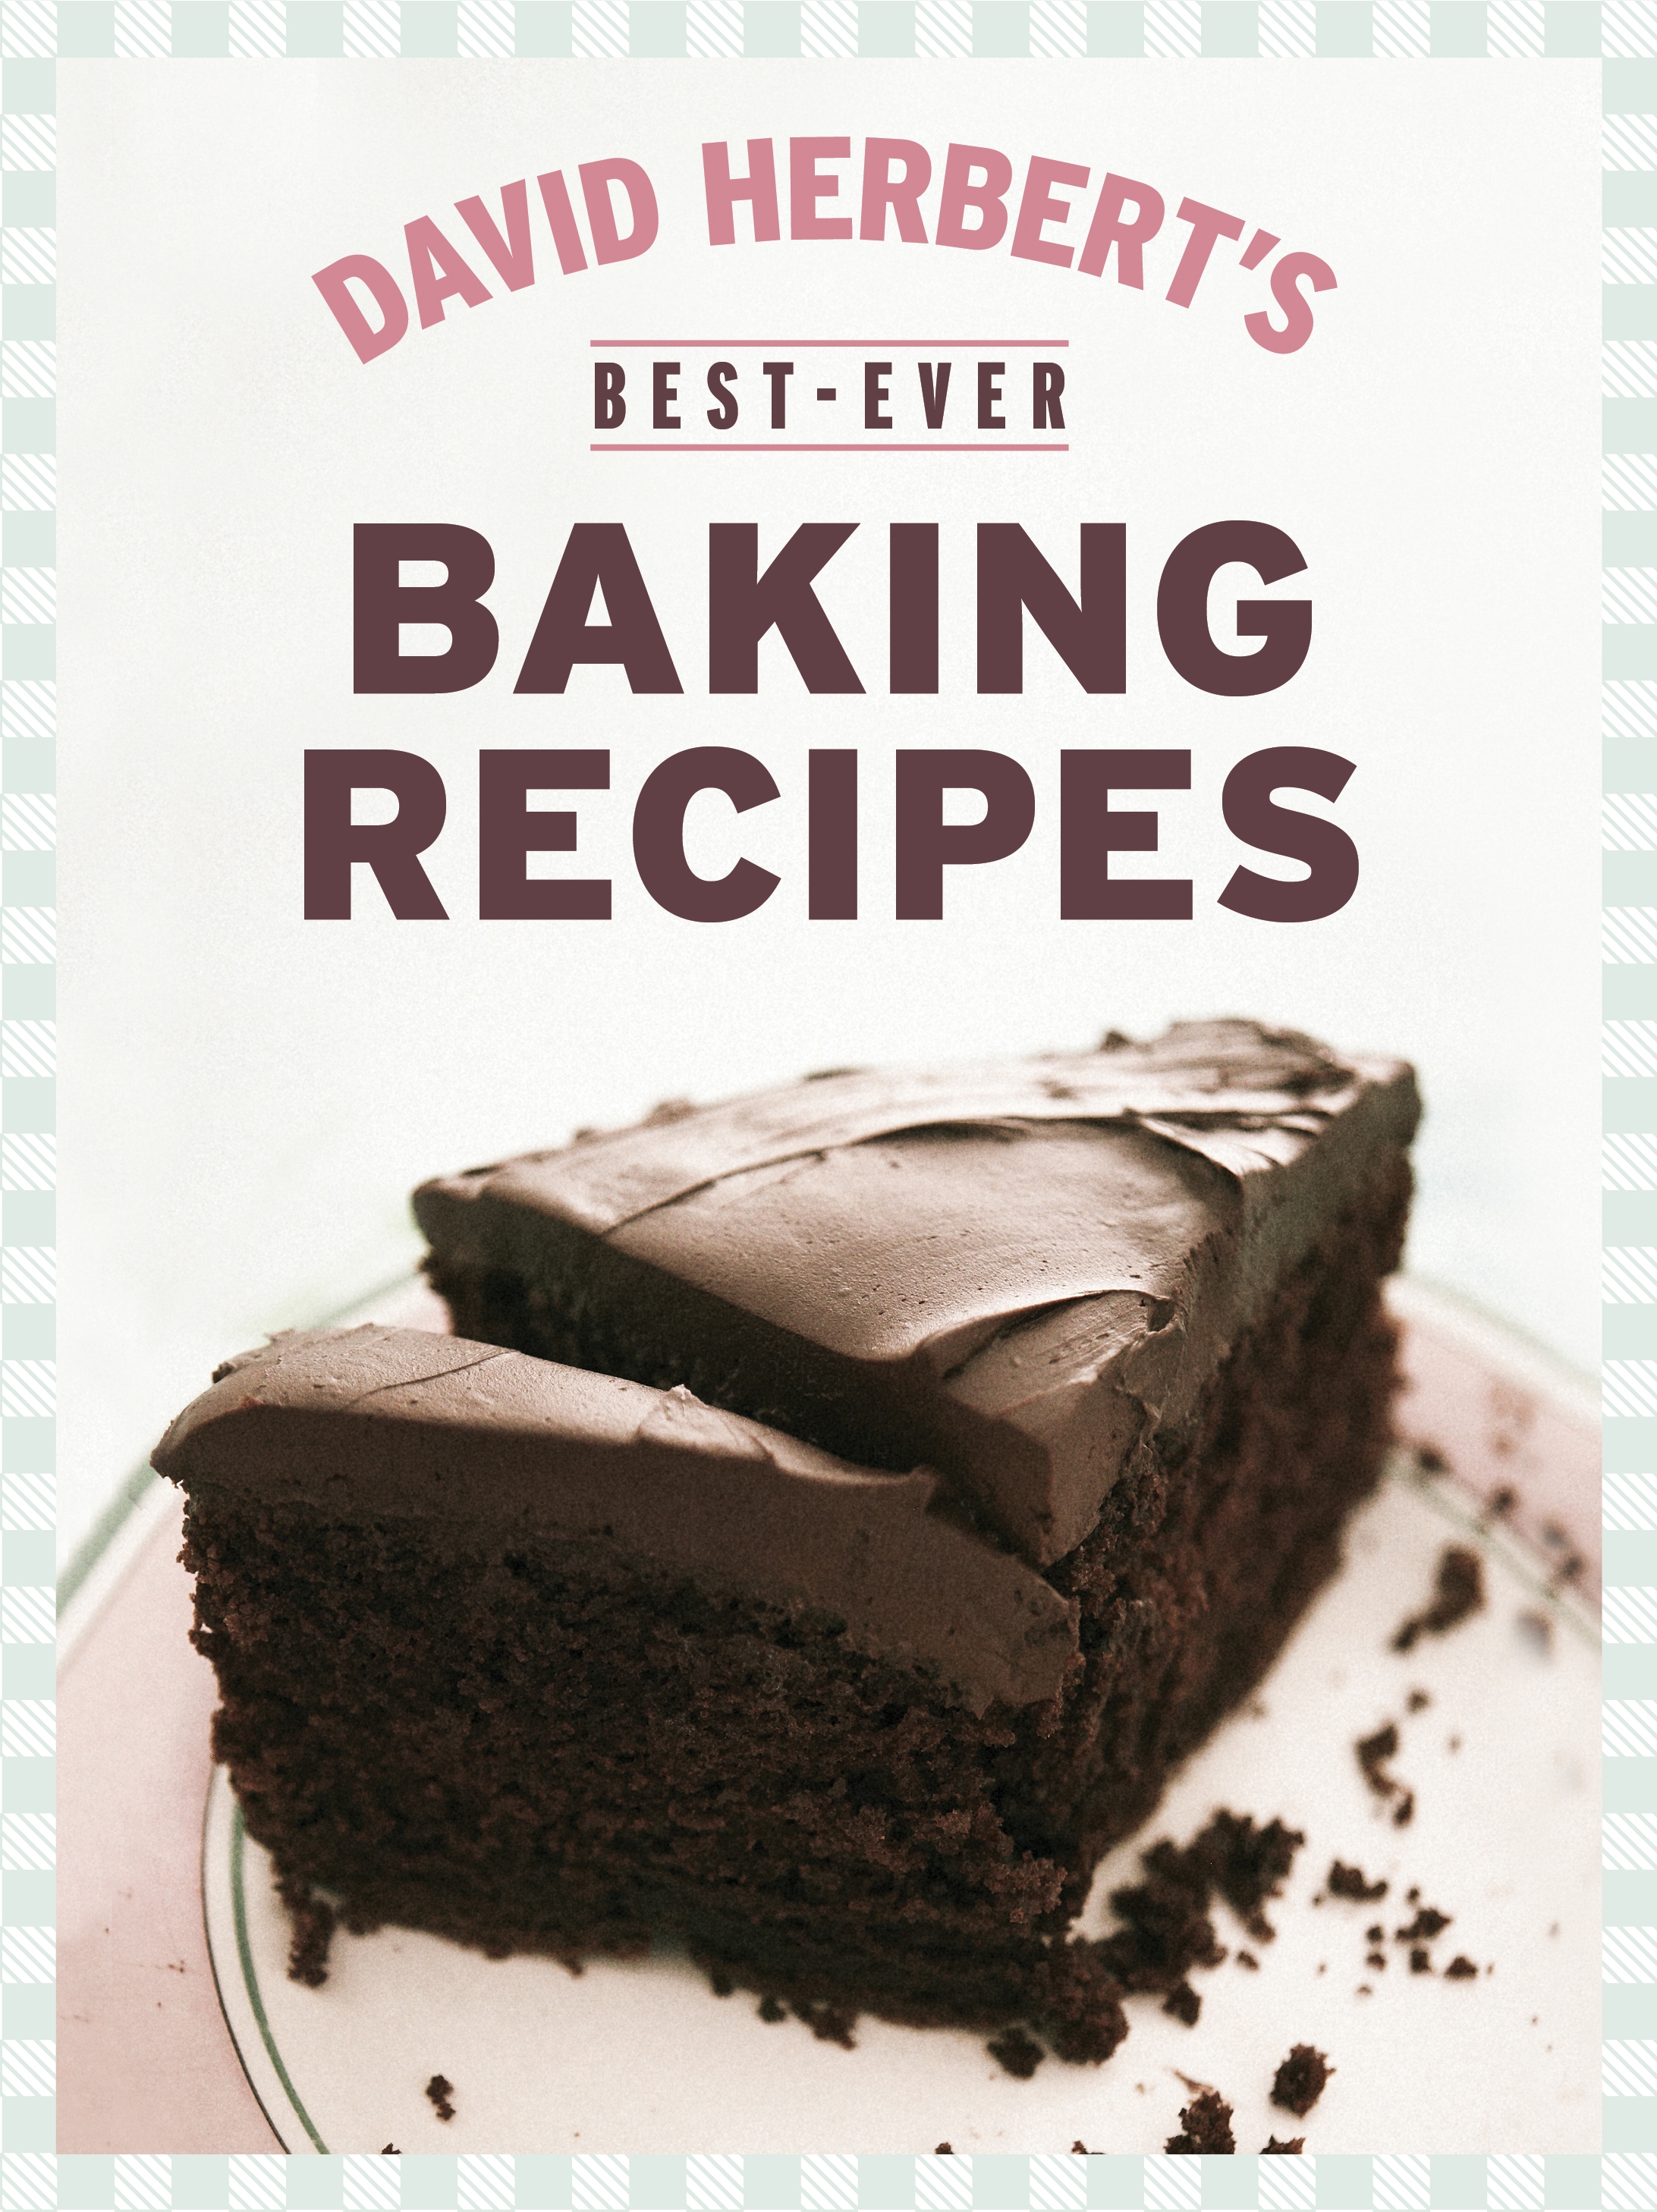 Cake recipes - Apps on Google Play